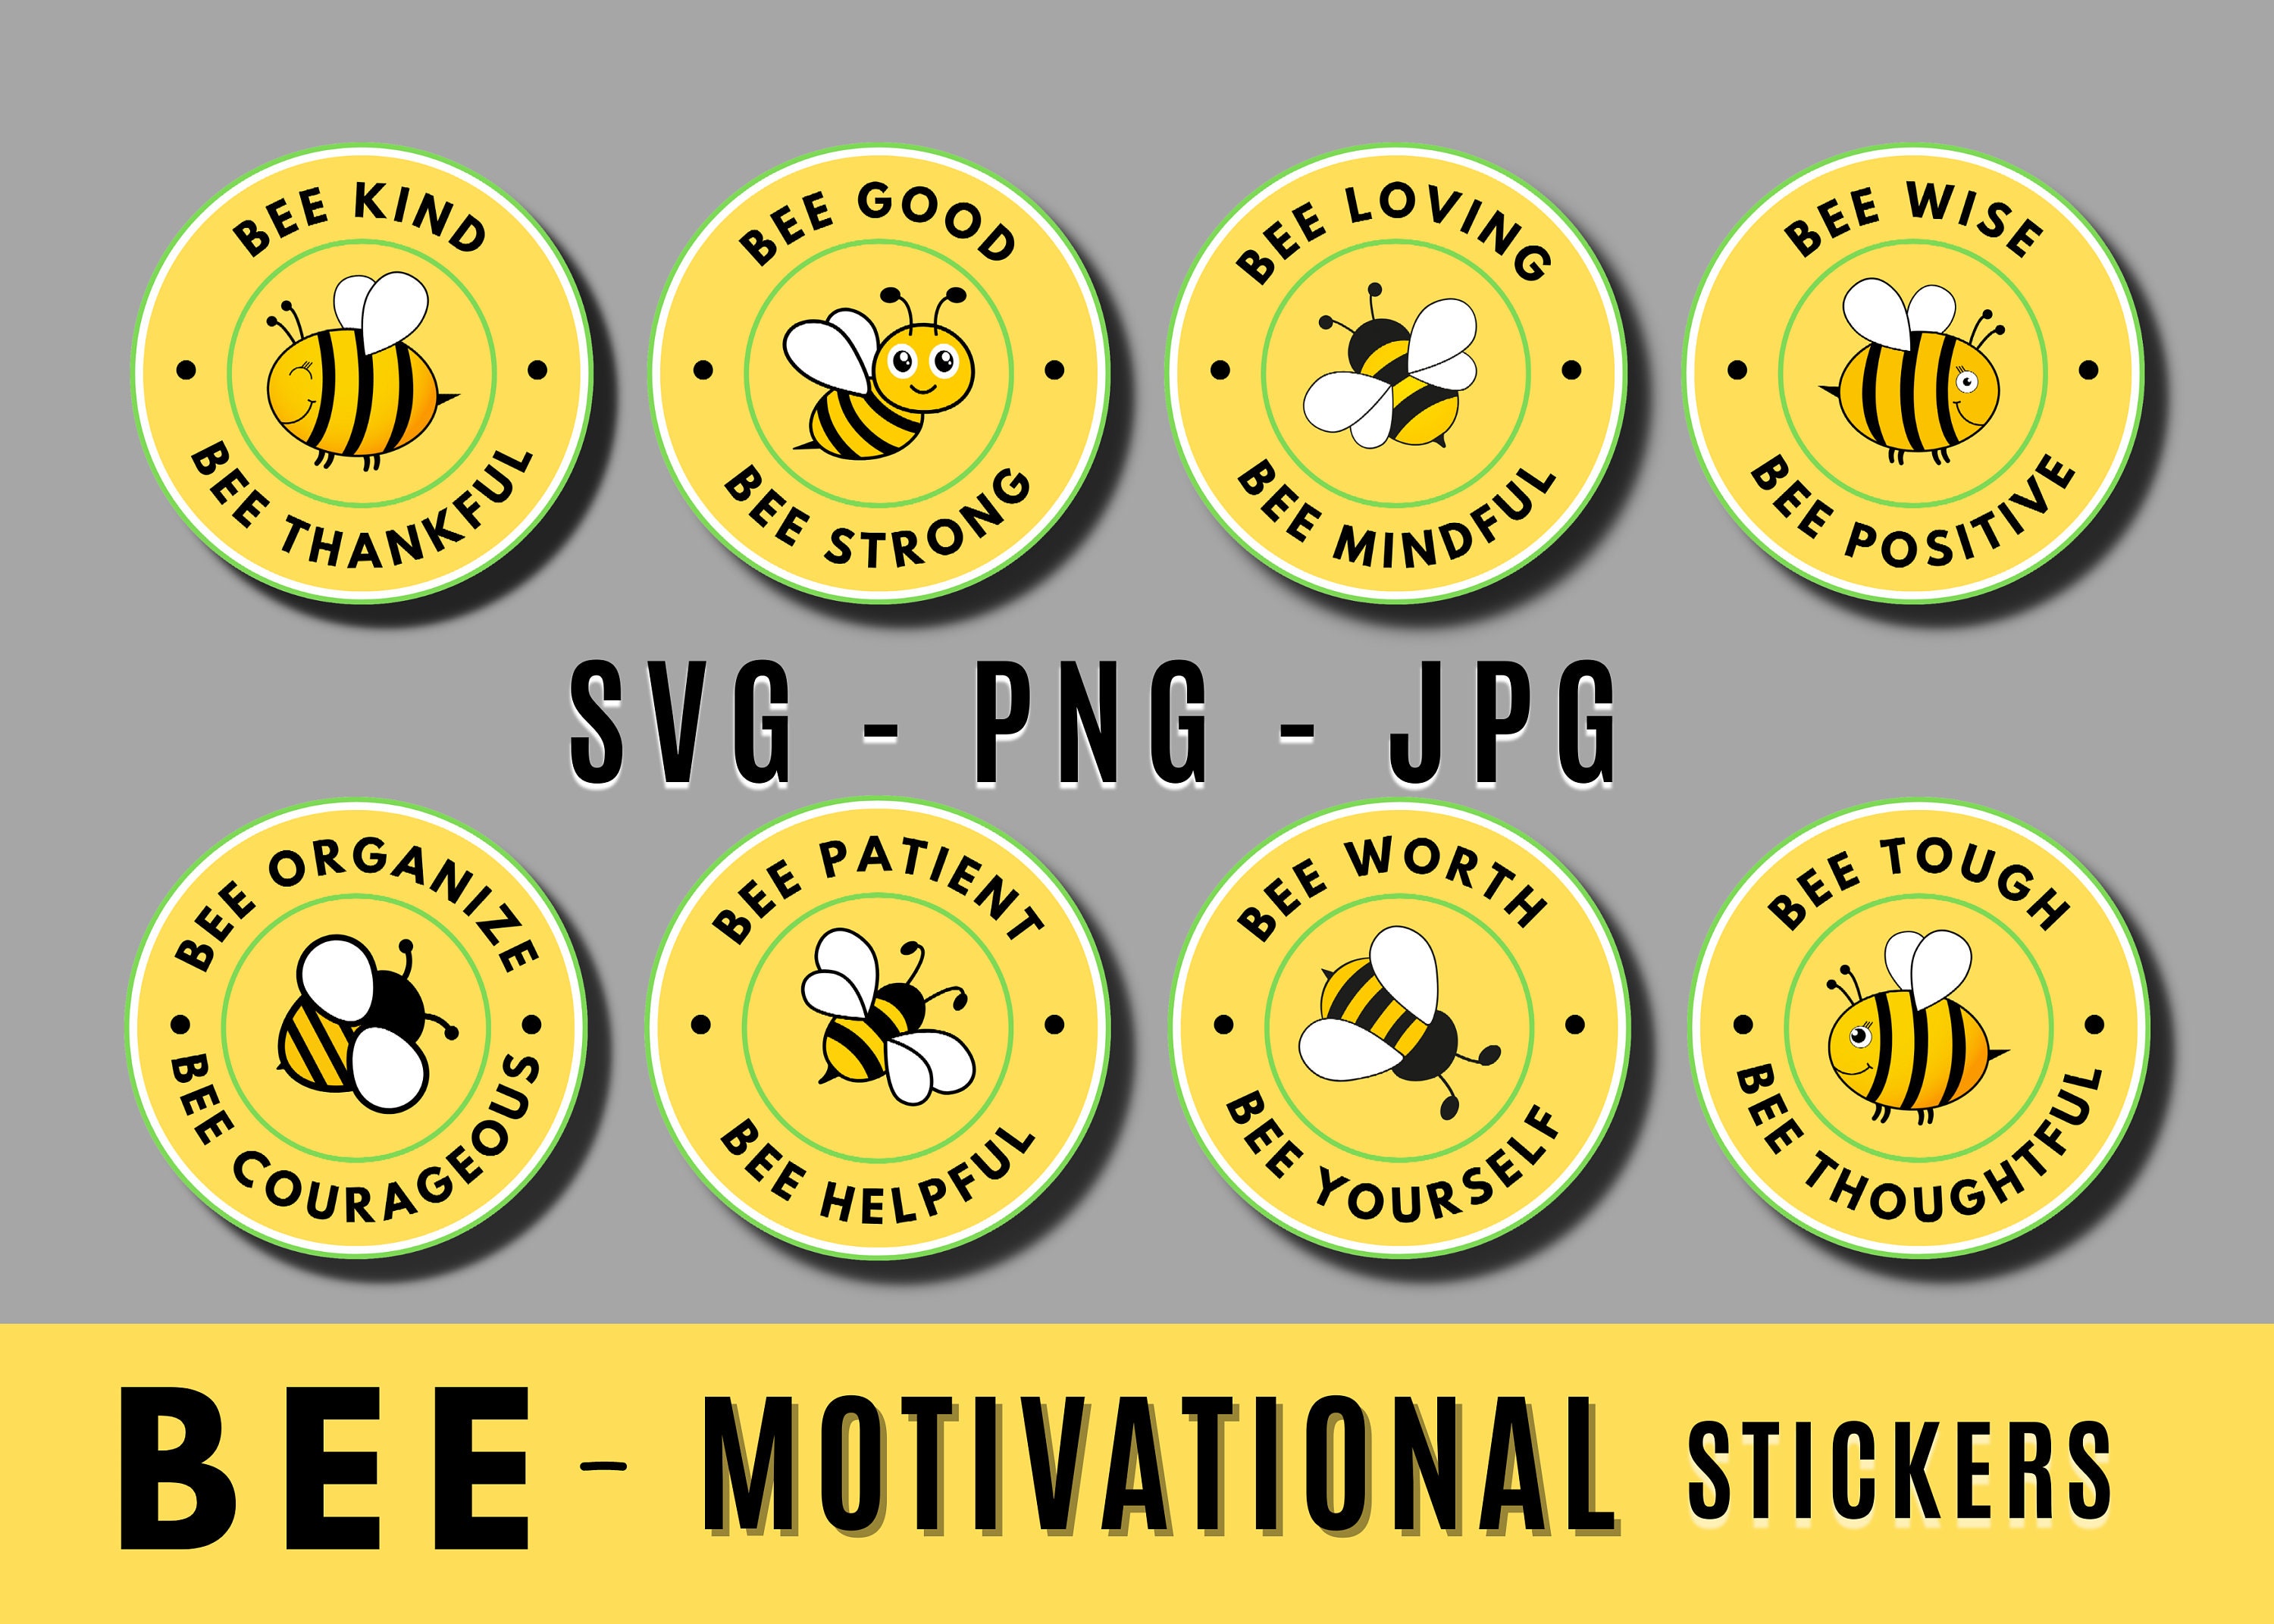 Water Bottle Stickers, Positive Stickers, Stickers Pack of 7, Vinyl Stickers,  Motivational Stickers, Stickers for Water Bottles,laptop Decal 